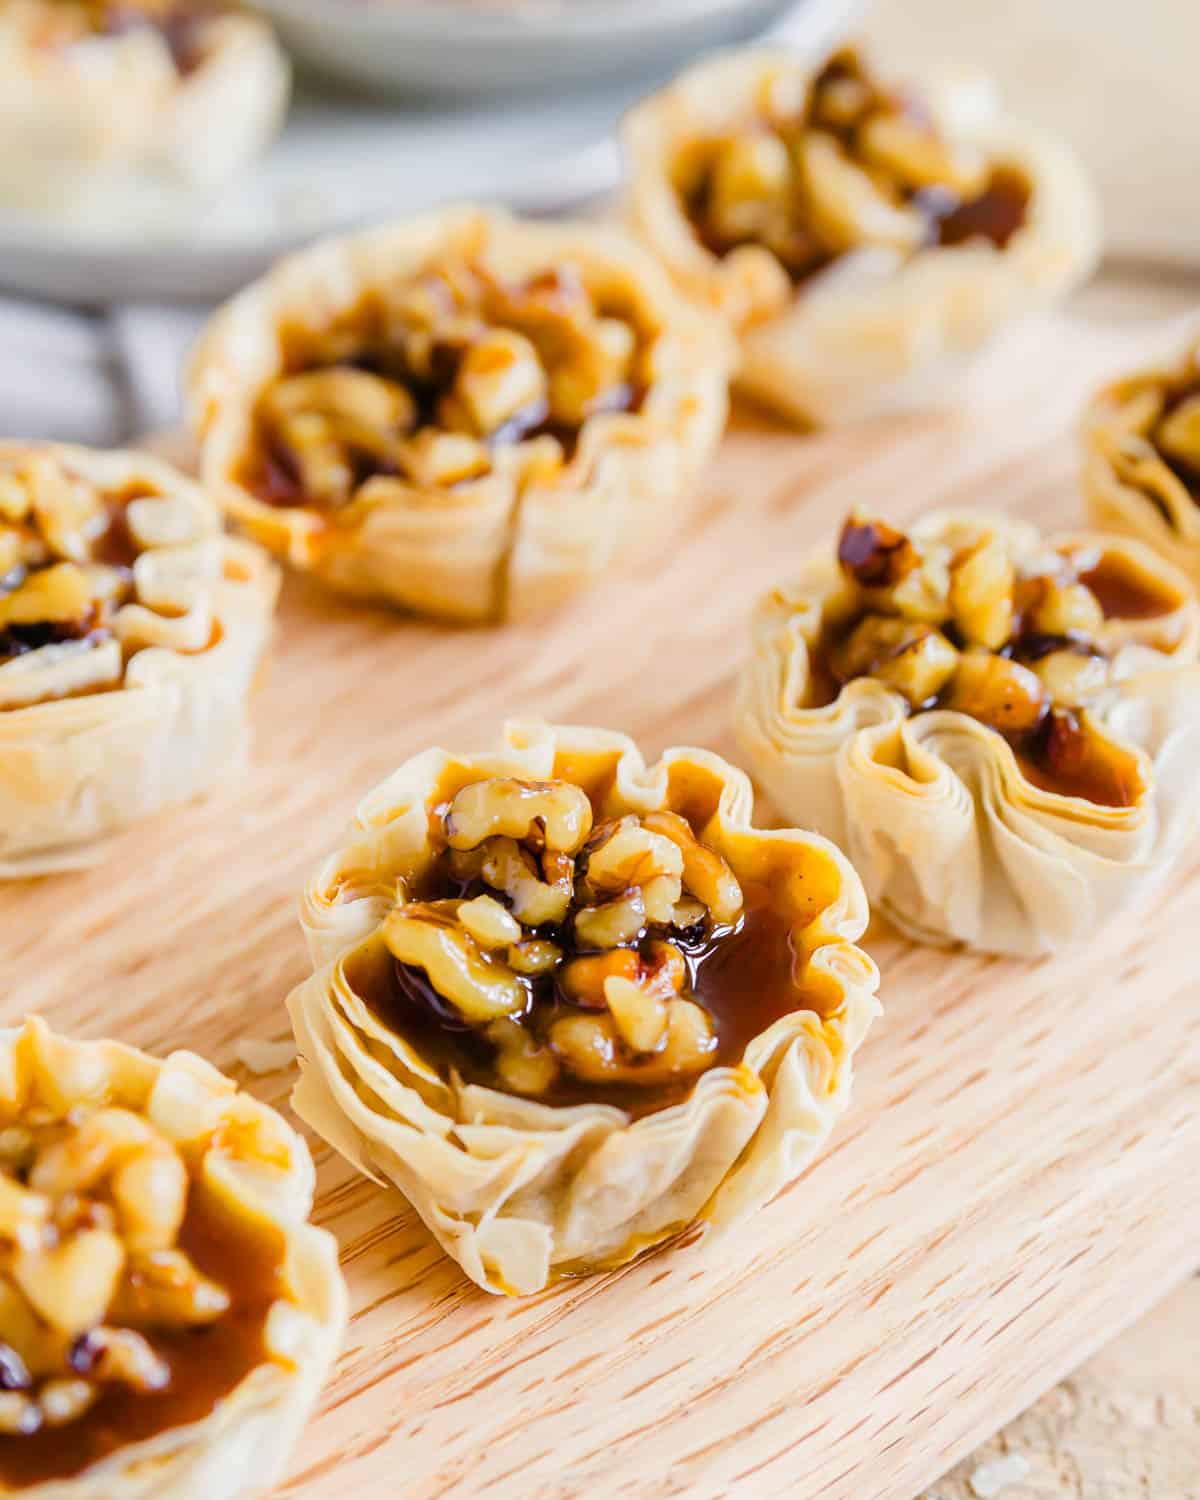 Pumpkin pie bites lined up on a wooden cutting board.